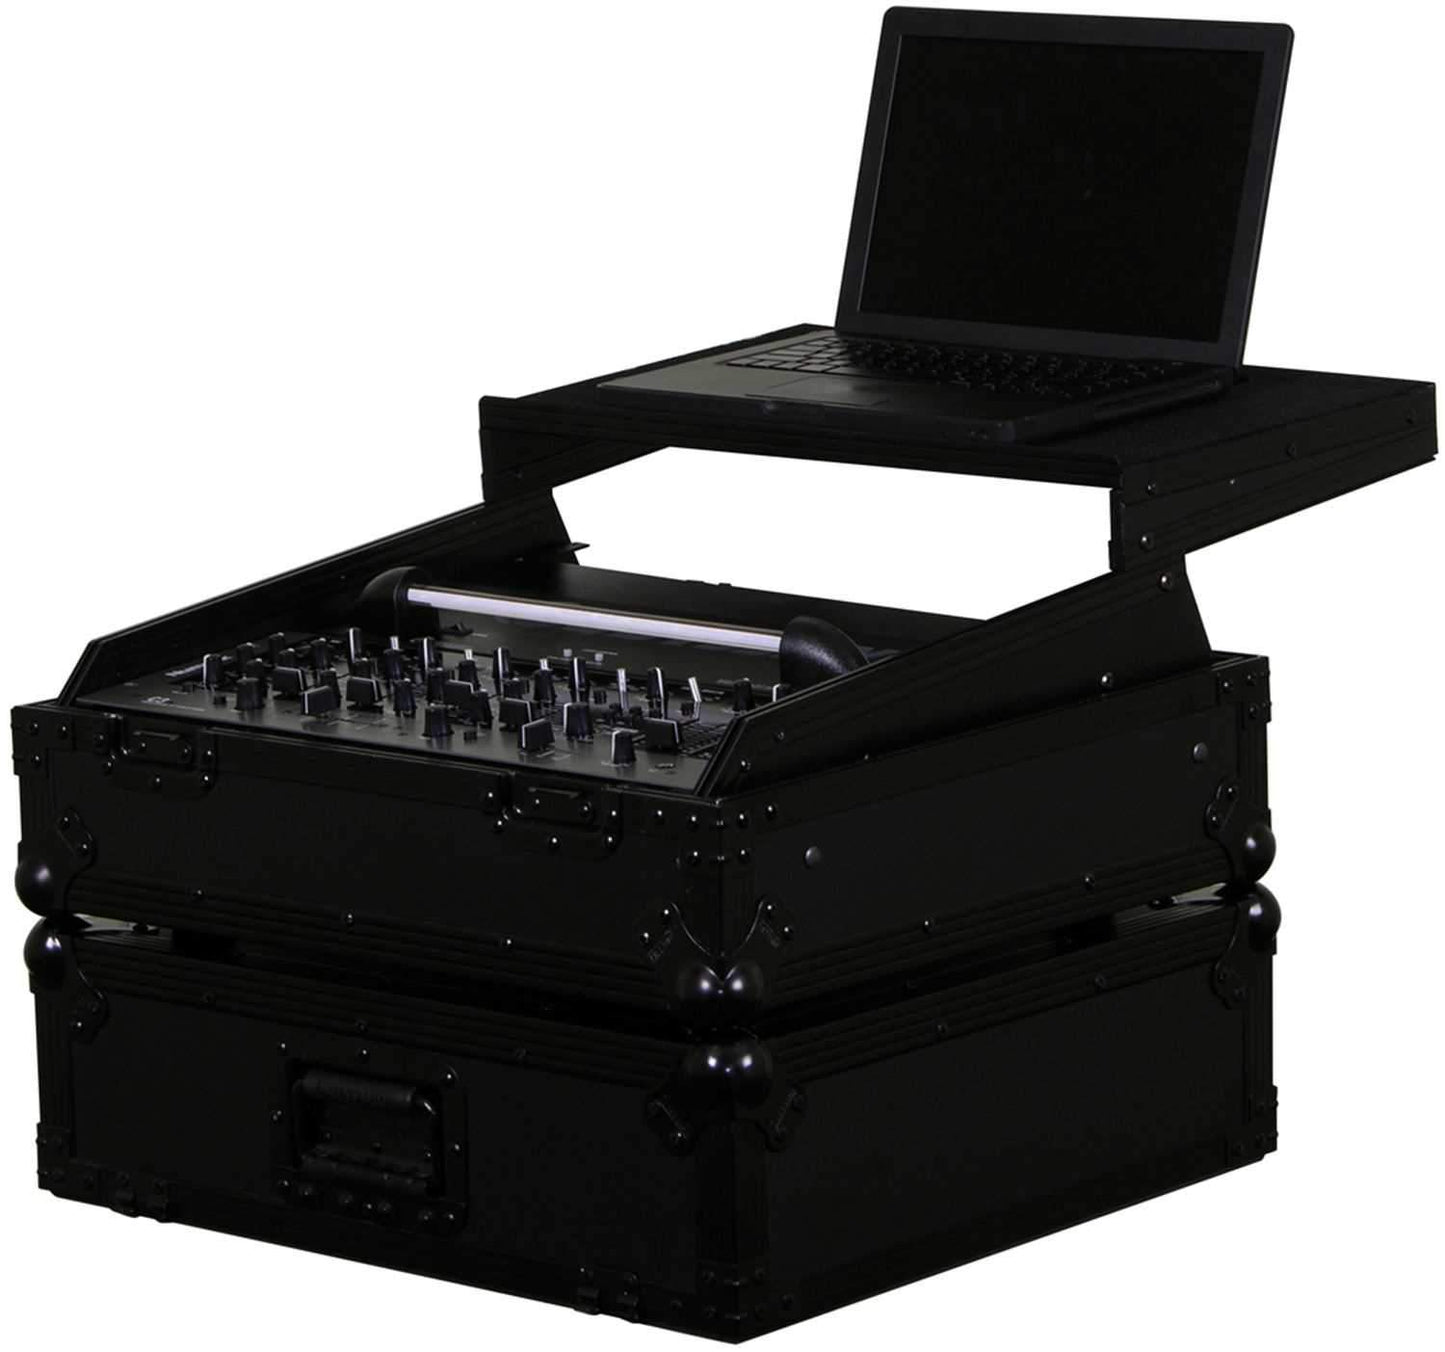 Odyssey FFXGS10BL FX 19-Inch Rackmount Mixer Glide Case with LED Panel - ProSound and Stage Lighting